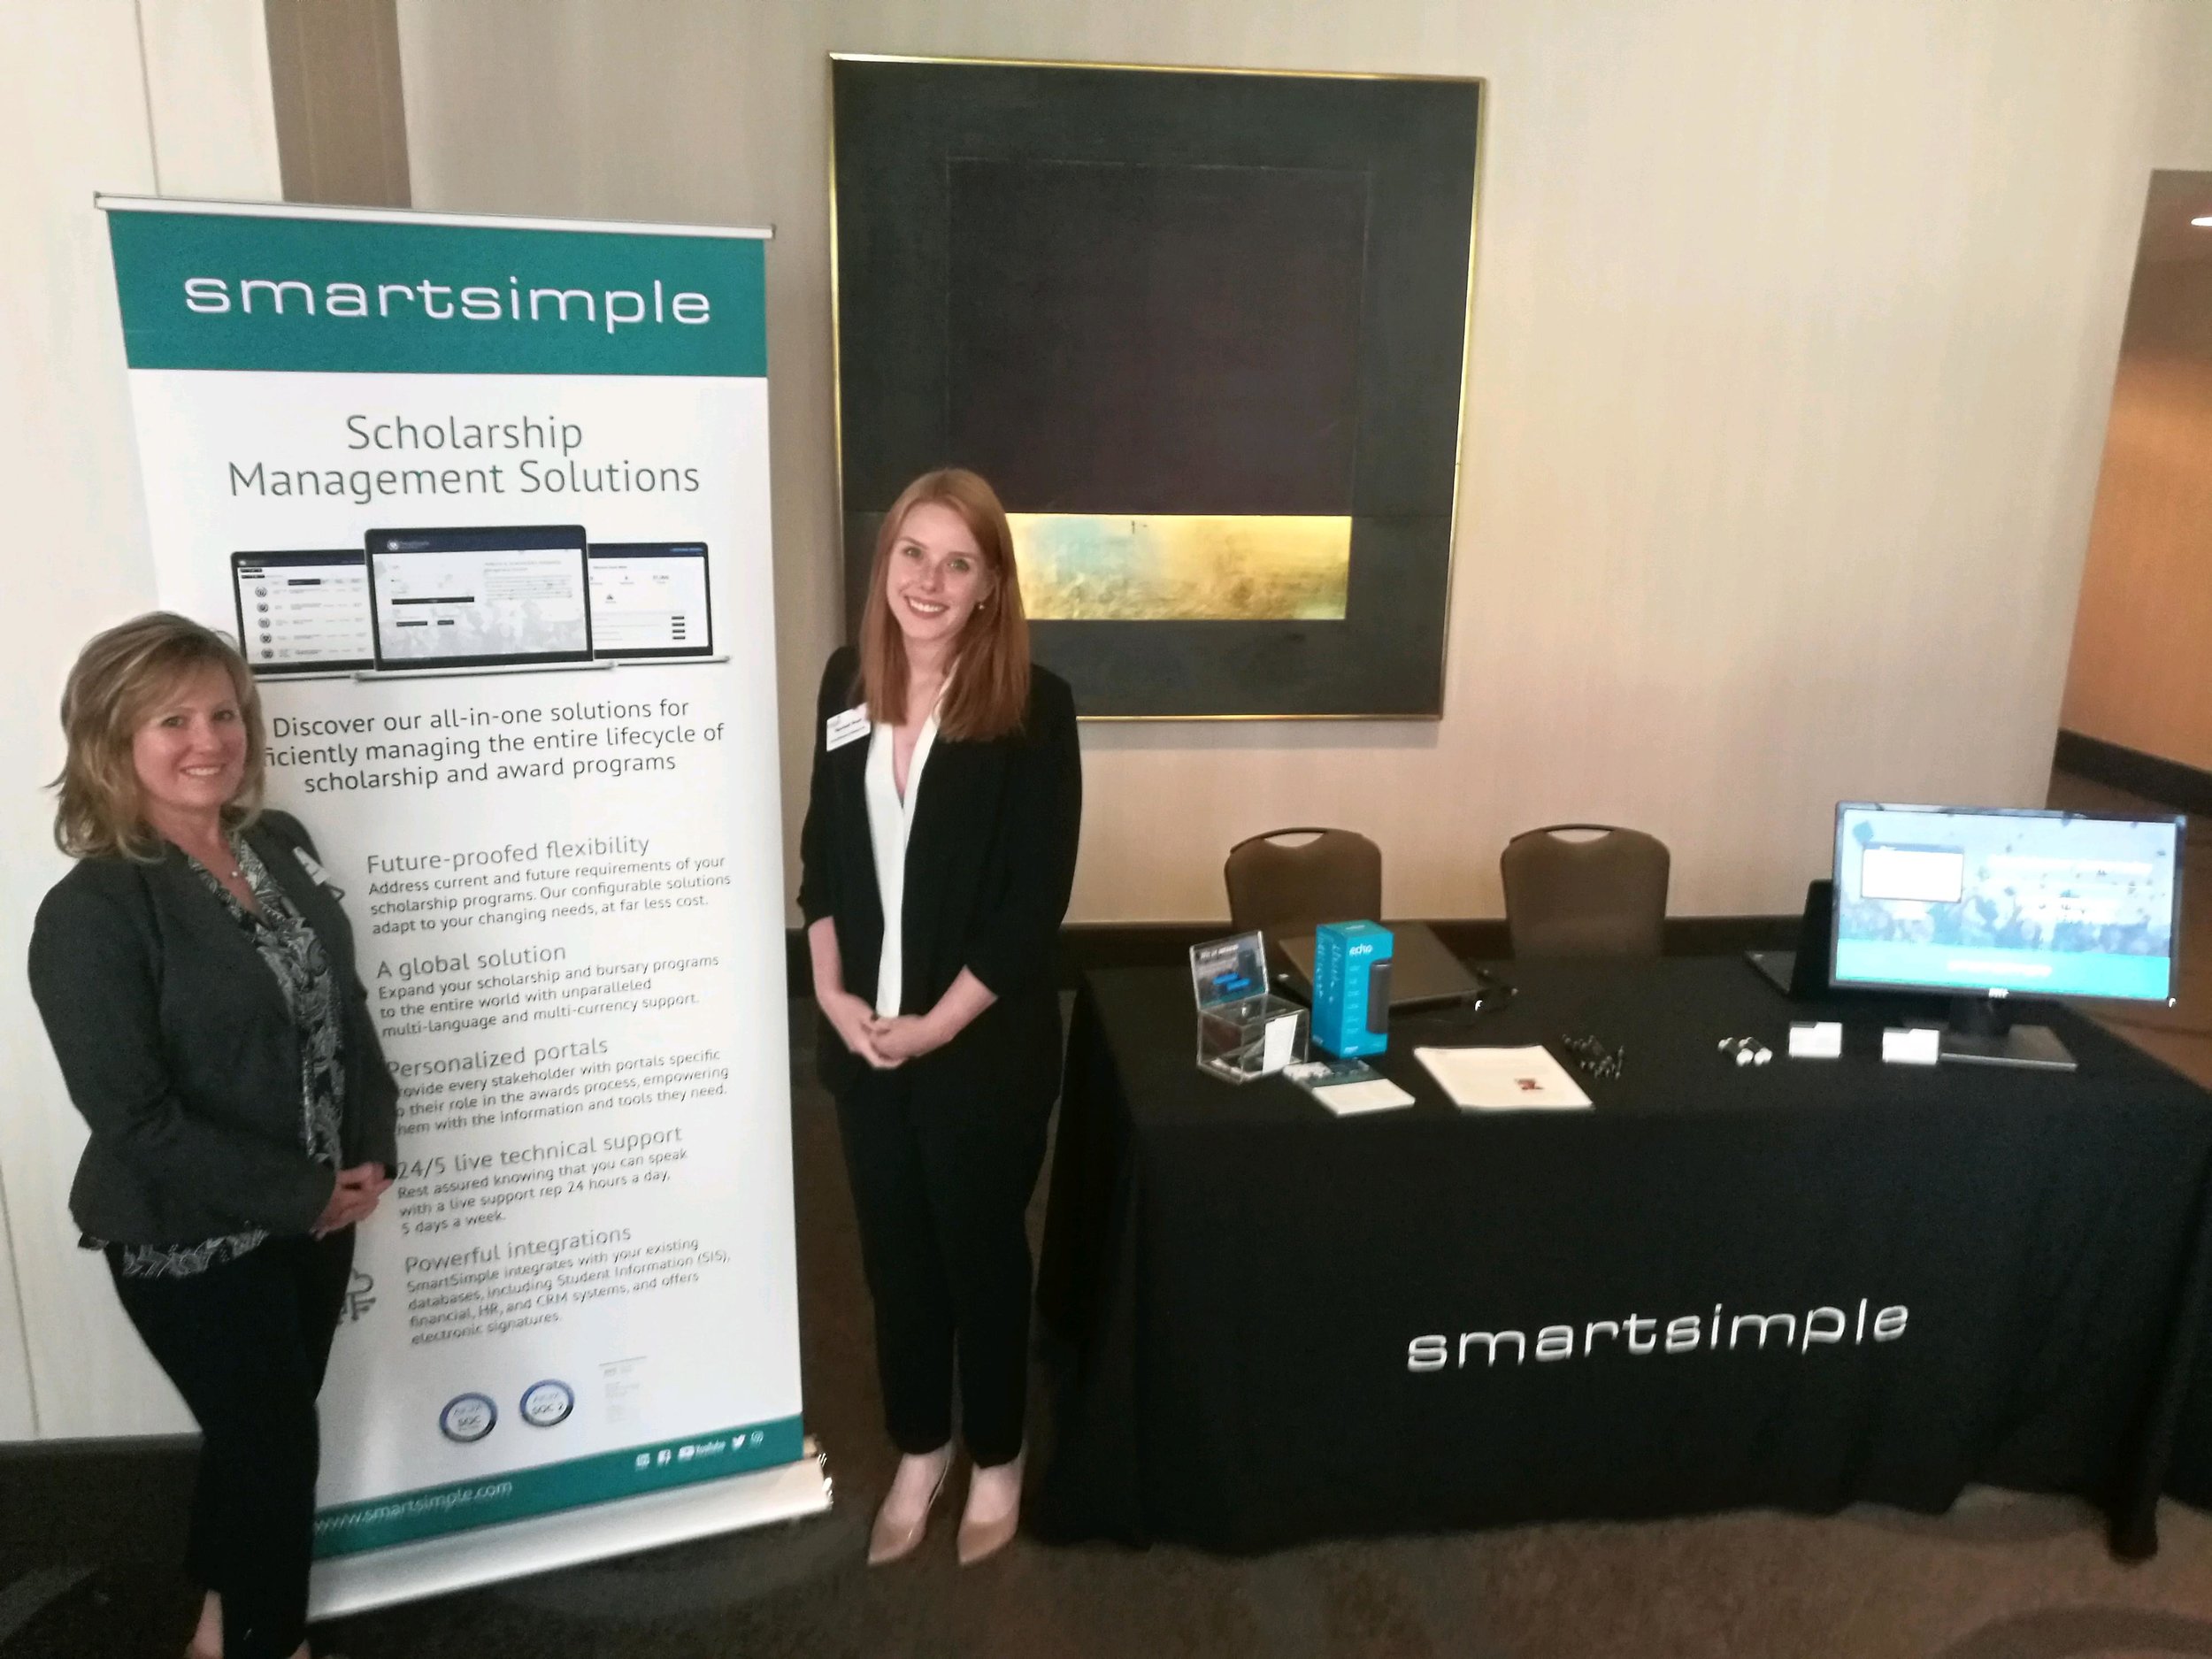  SmartSimple’s Director of Research Solutions, Teresa Clarke, and Research Analyst, Rachael Sloat 